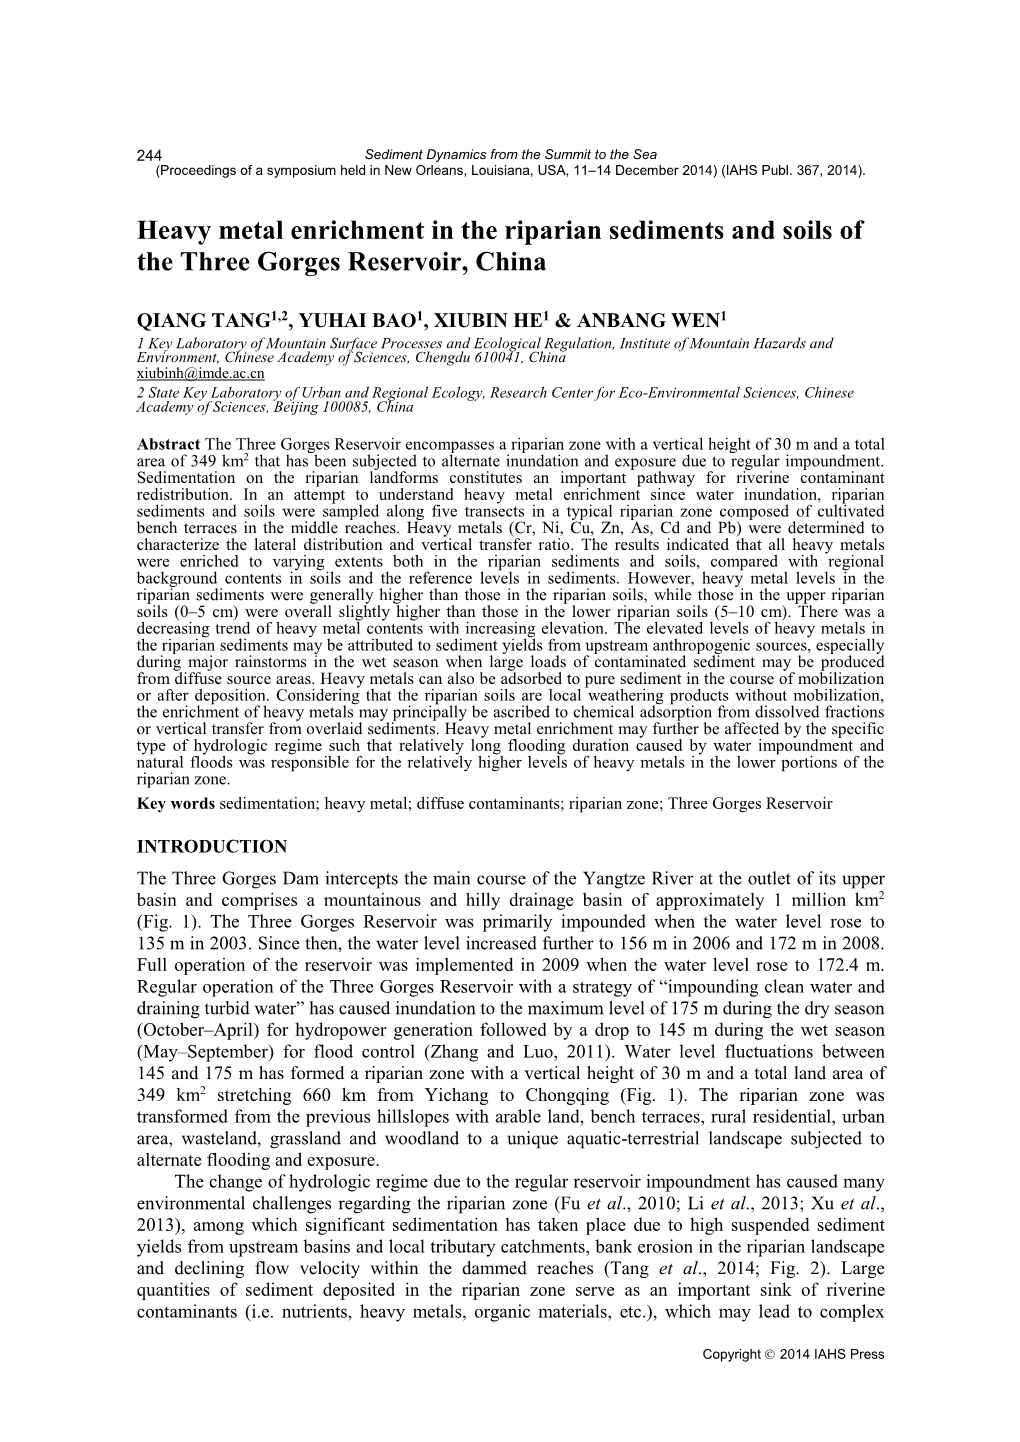 Heavy Metal Enrichment in the Riparian Sediments and Soils of the Three Gorges Reservoir, China